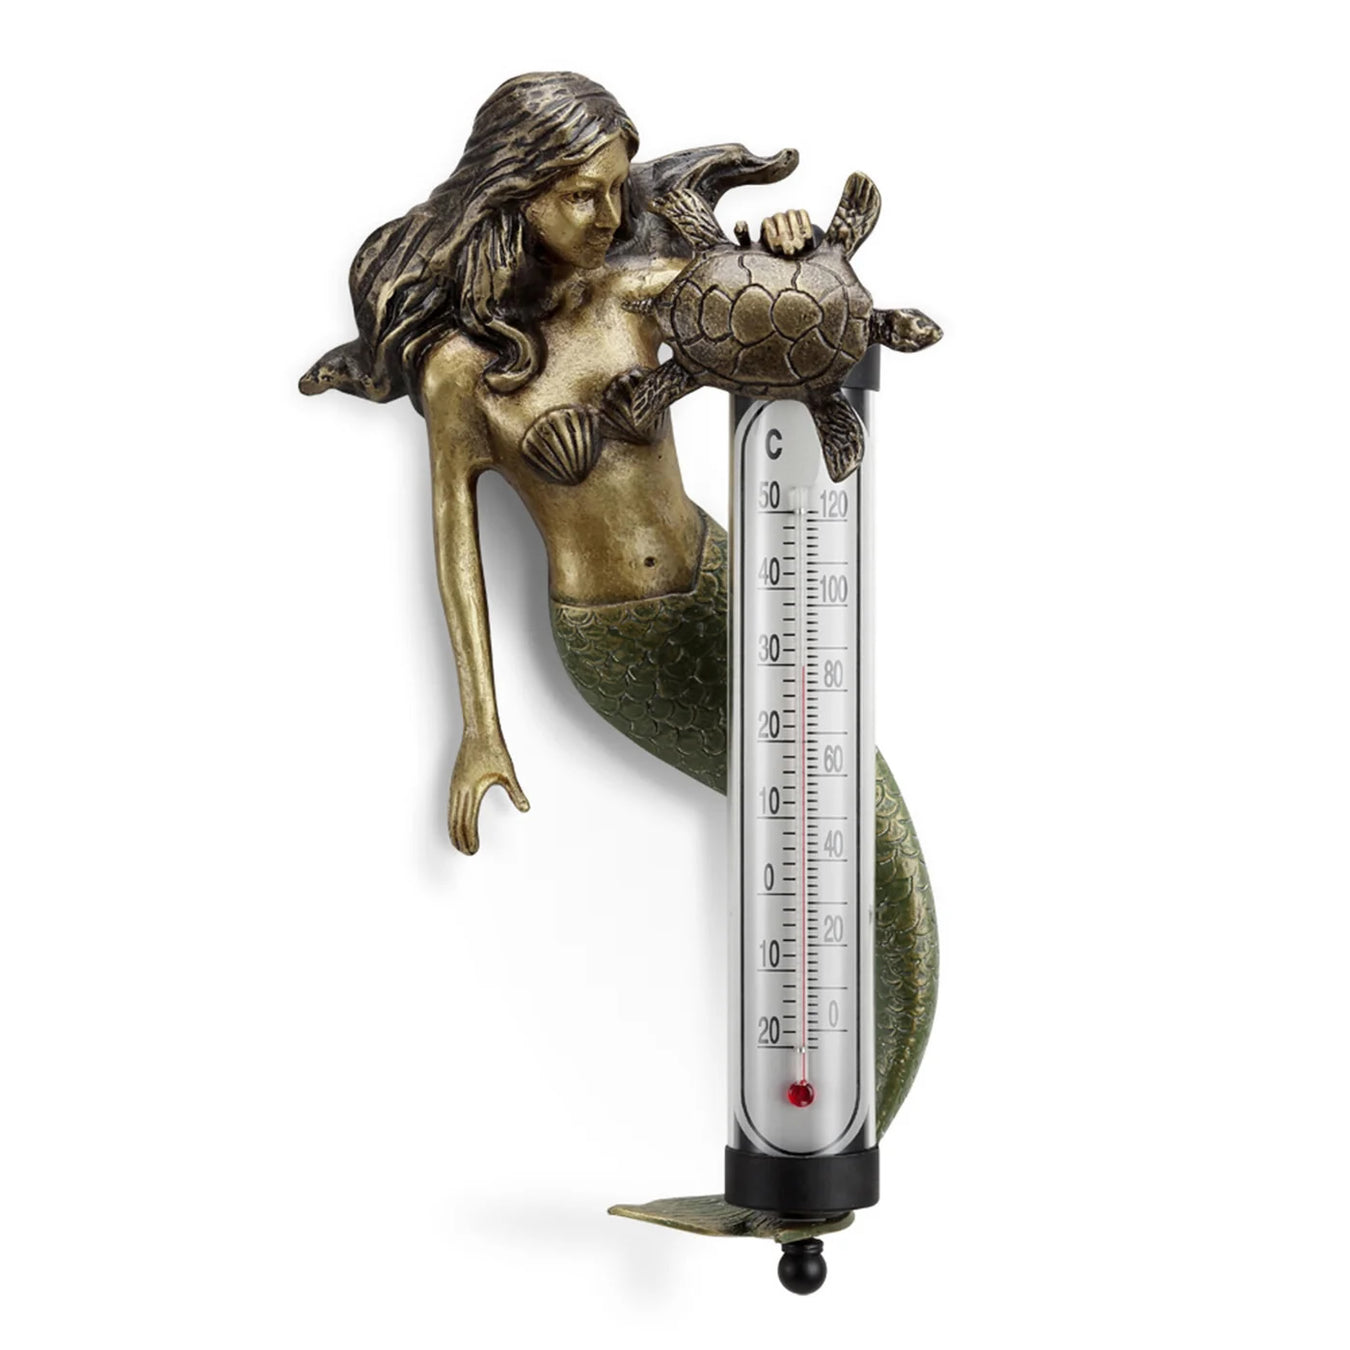 Rain Gauges & Thermometers